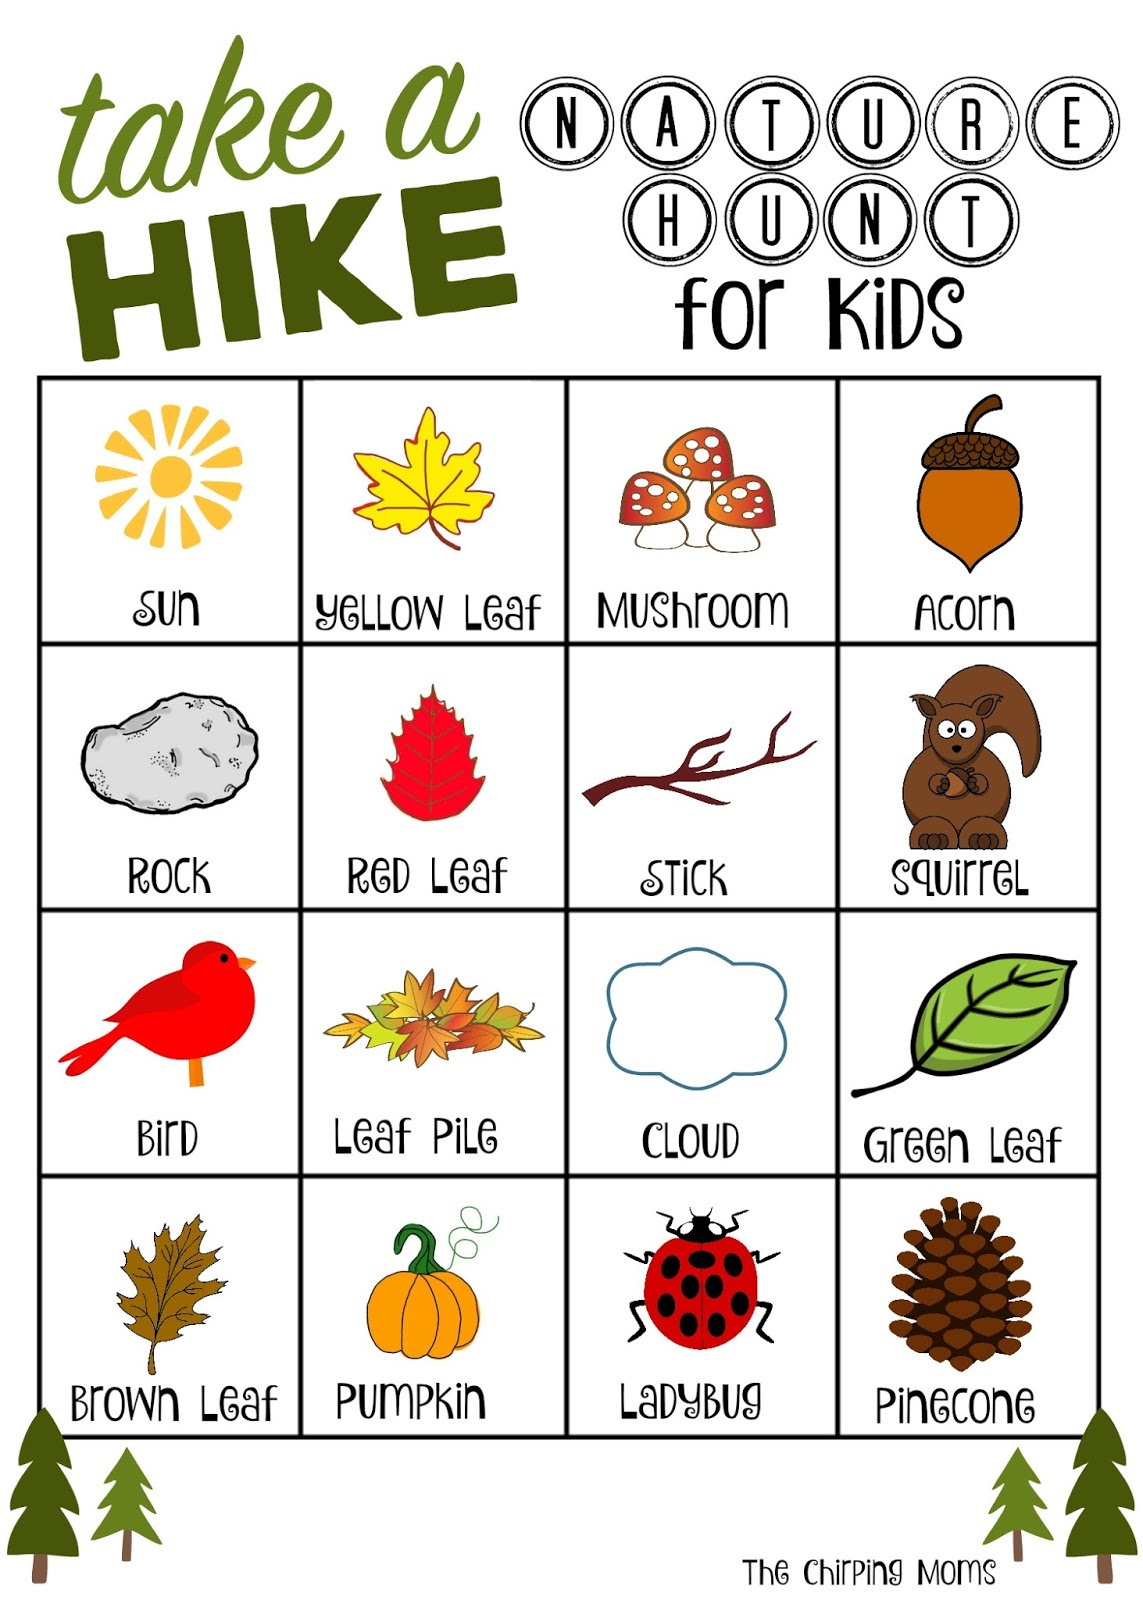  Take A Hike Nature Hunt Free Printable The Chirping Moms